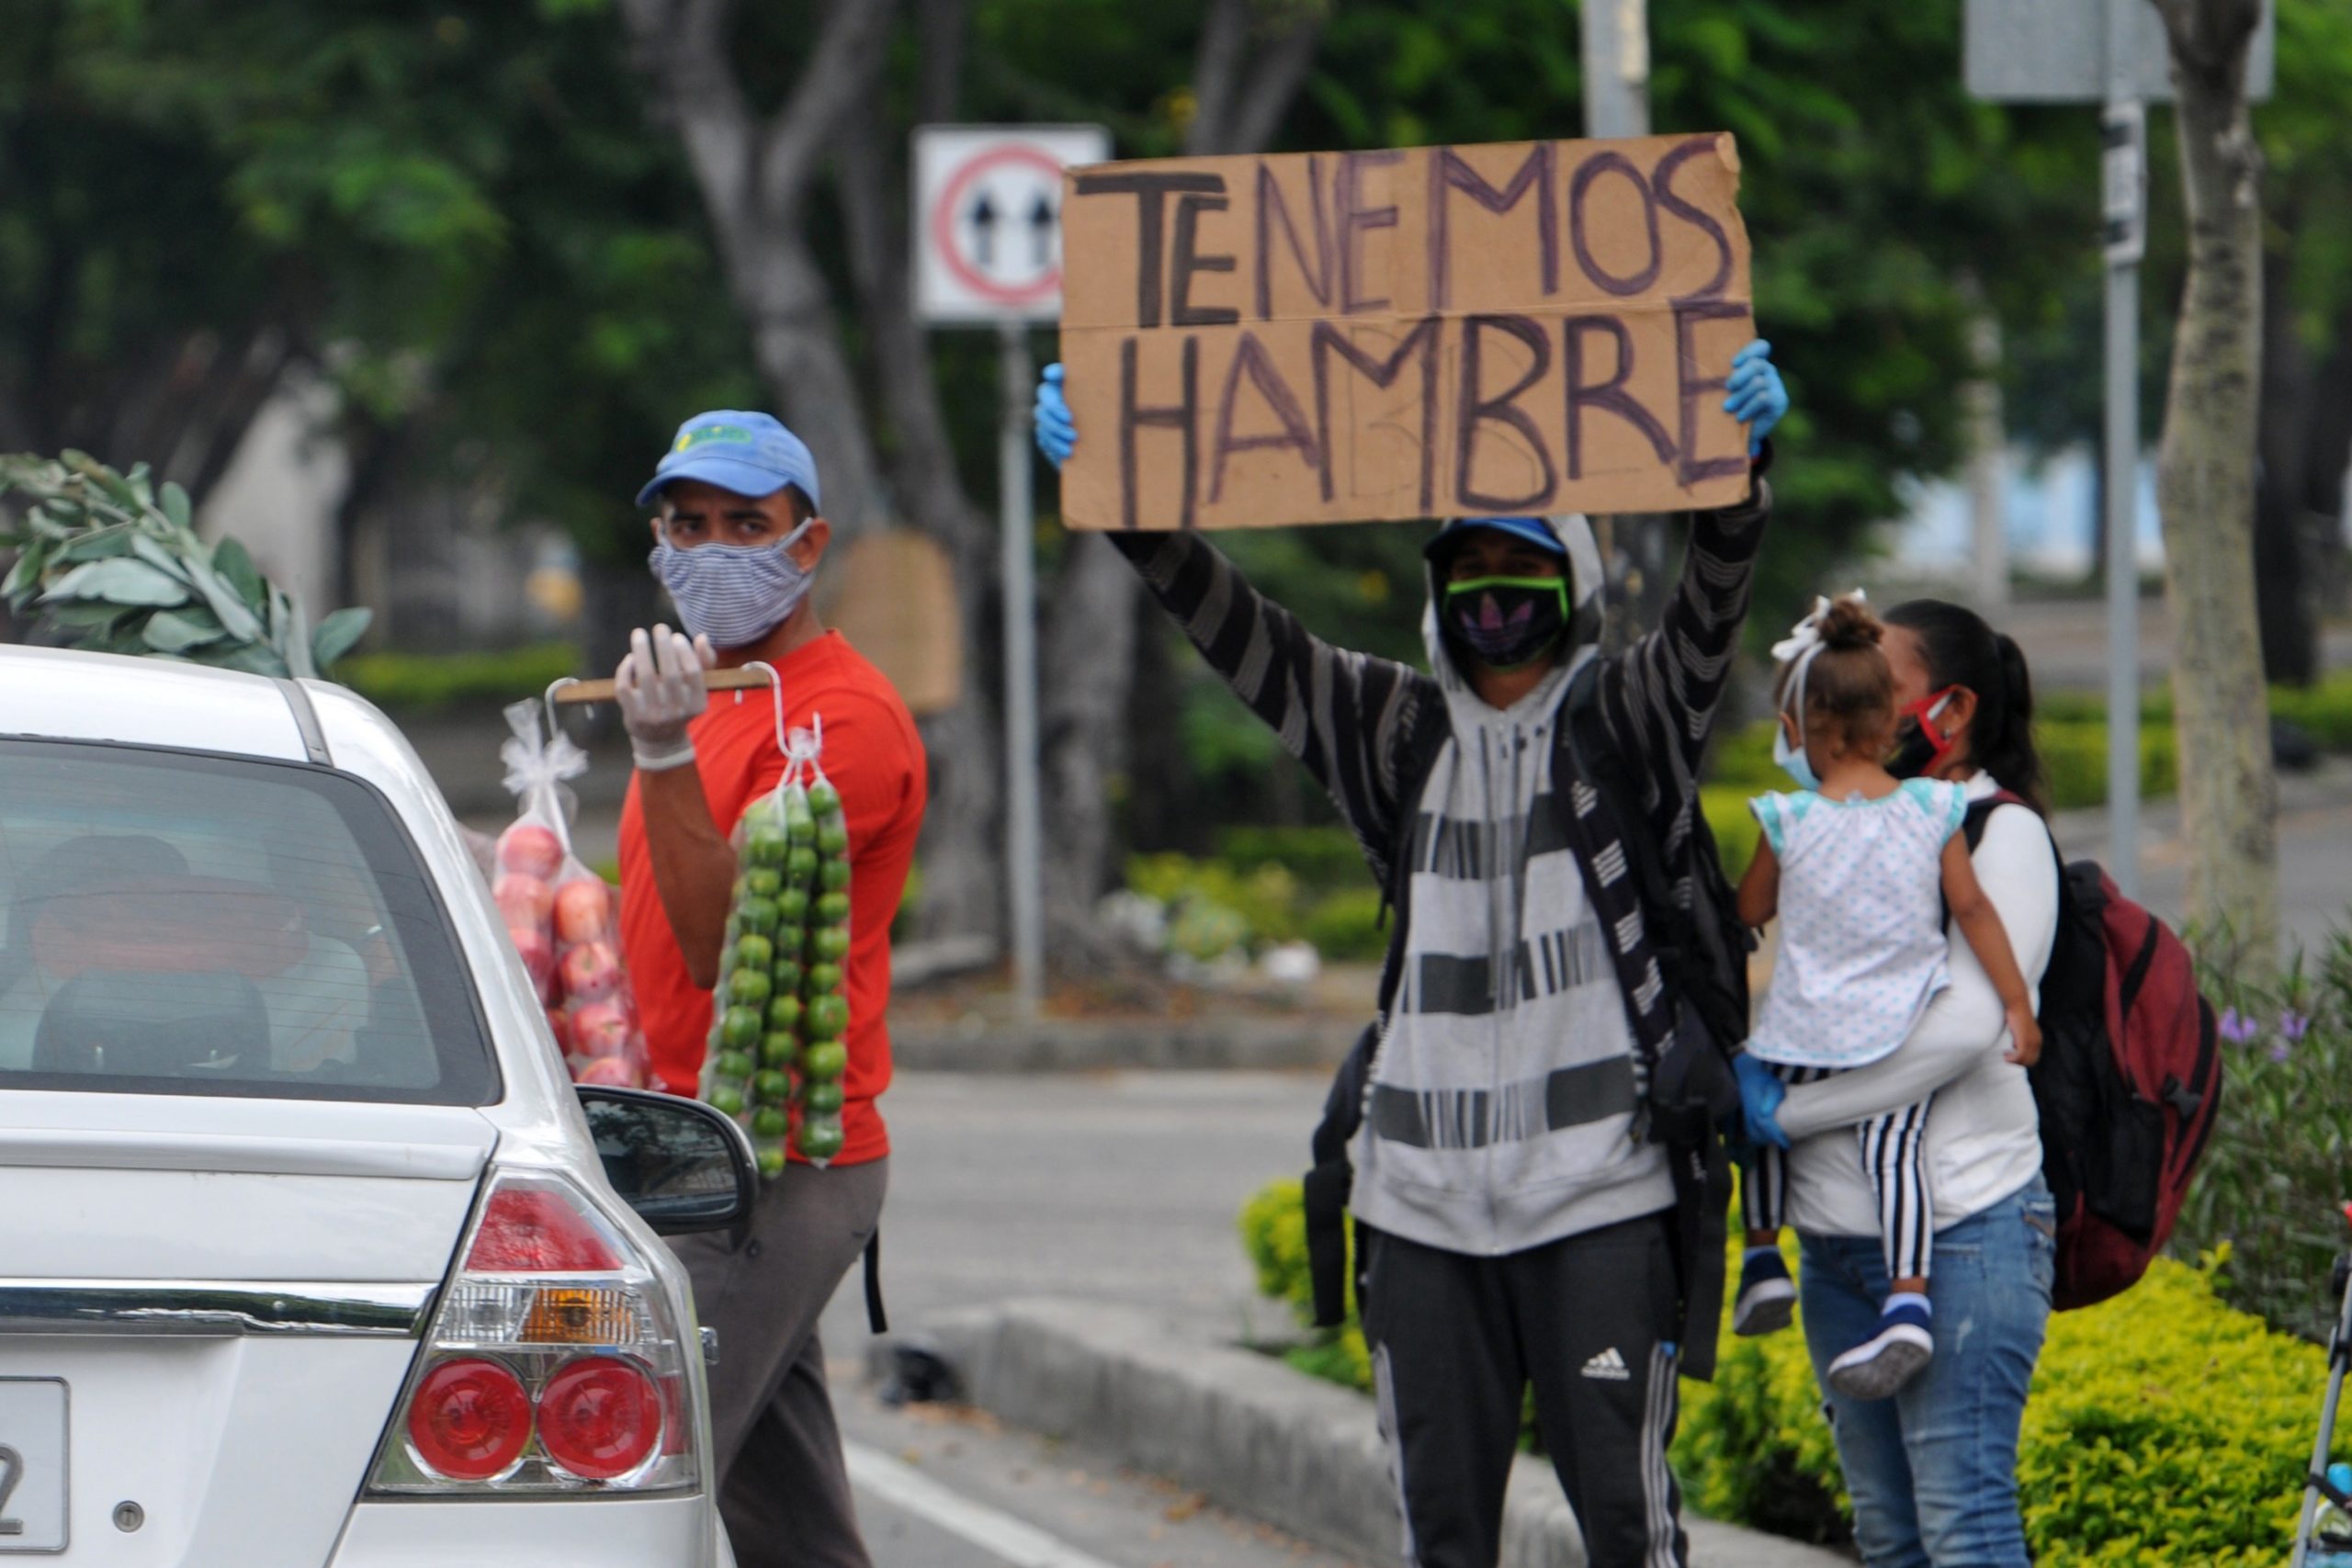 Venezuela Among Top 20 Countries in the World at Higher Risk of Furthering Population Hunger